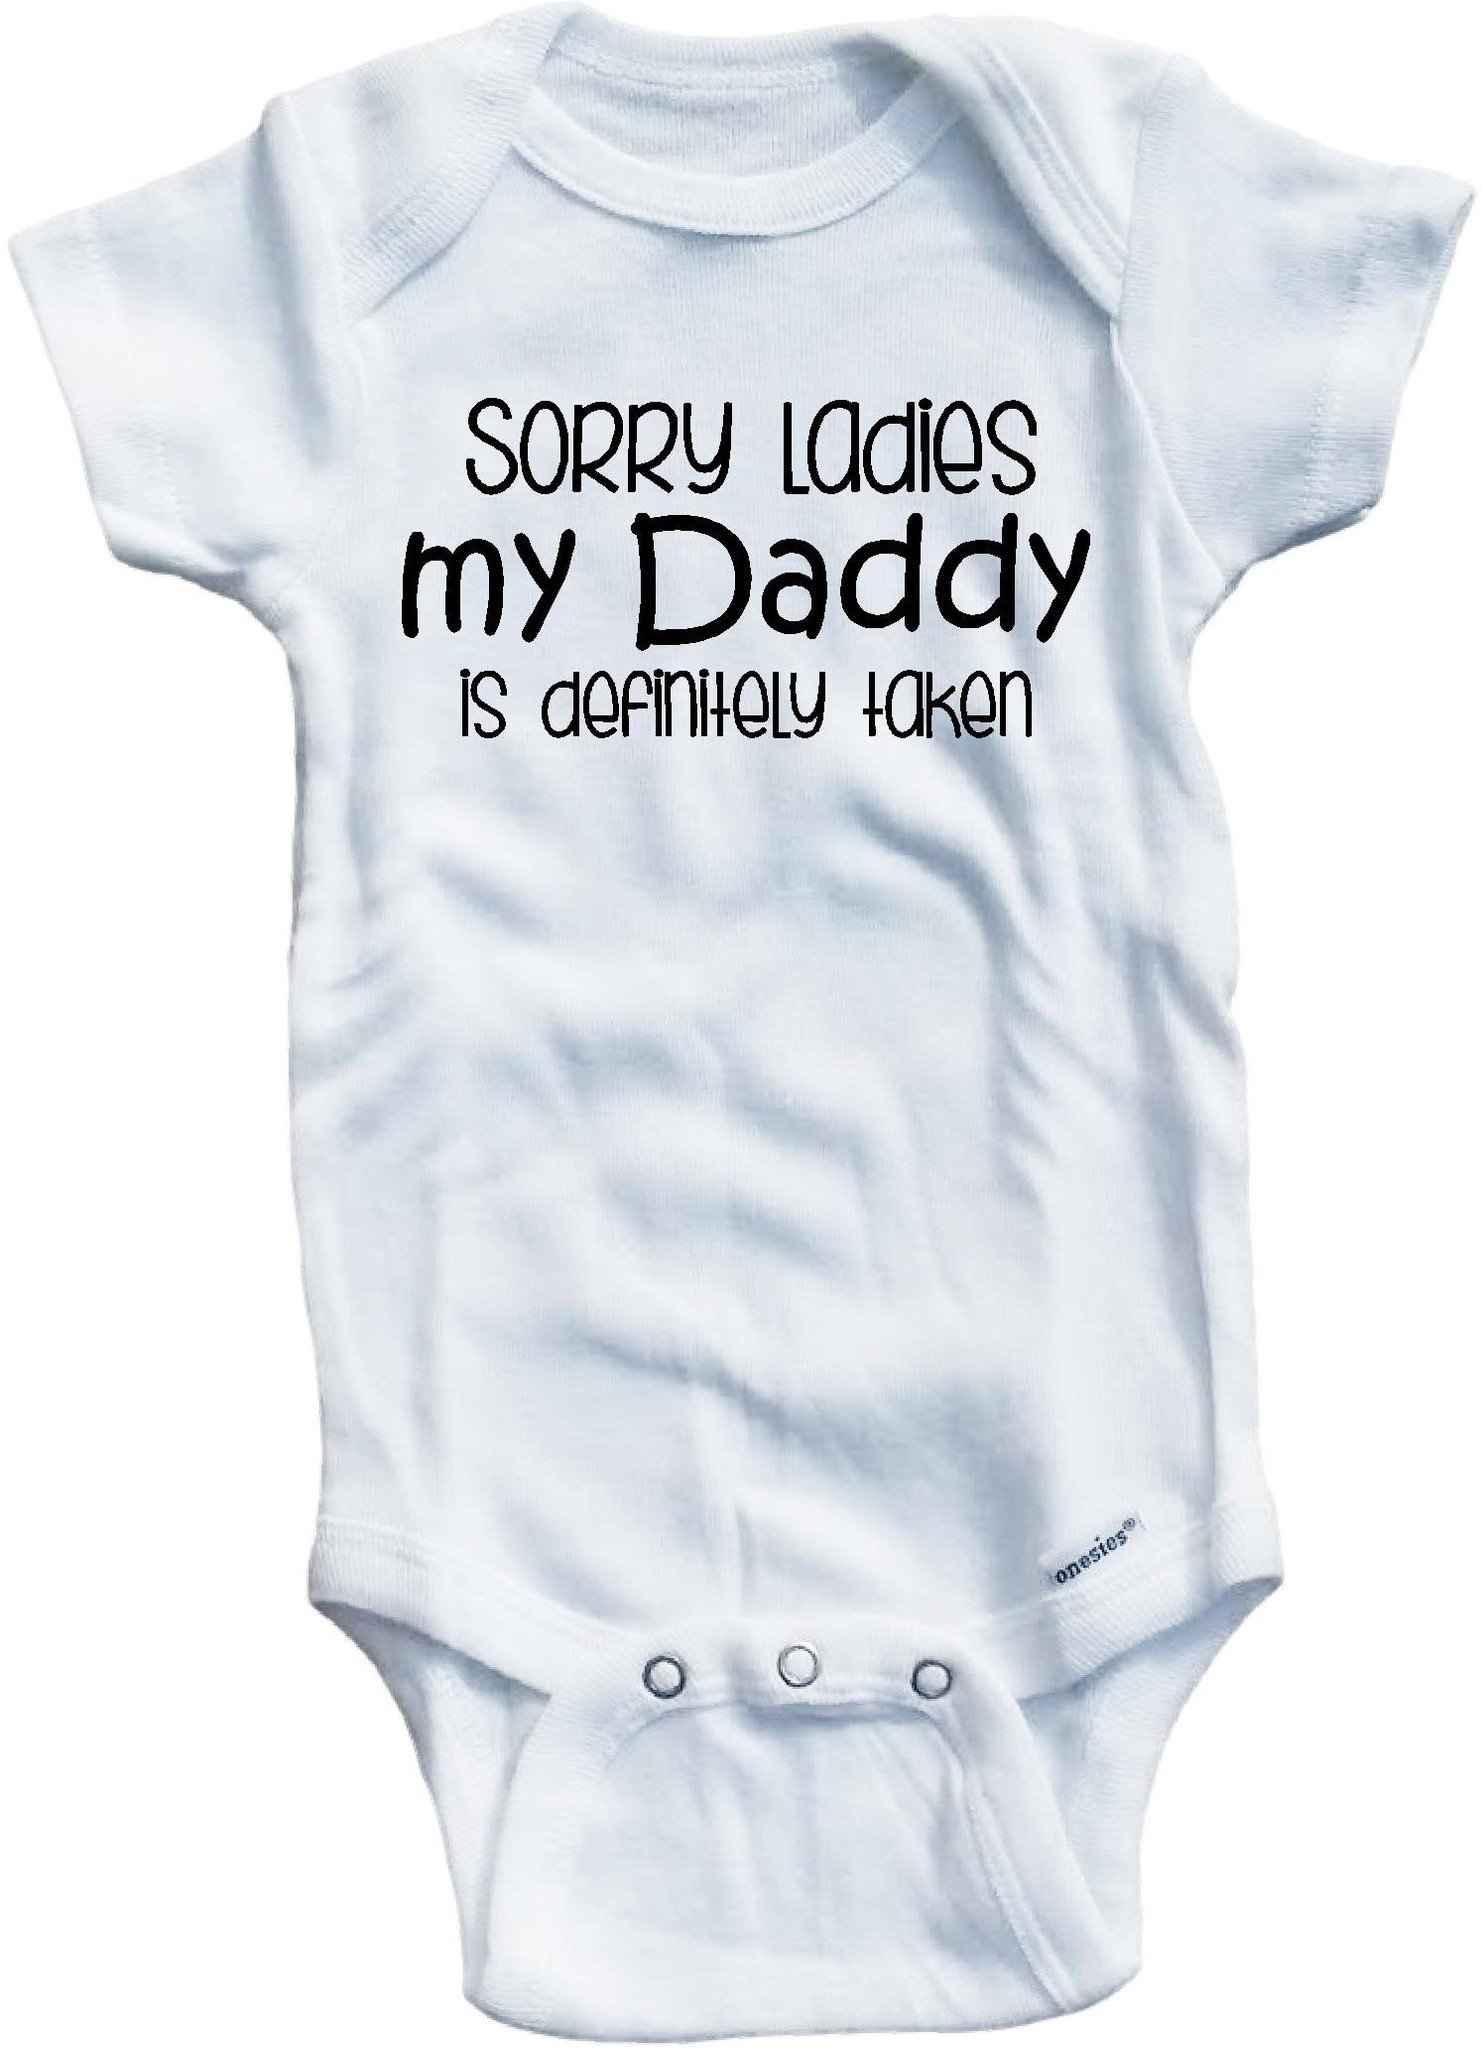 cute baby clothes mrwsxcm